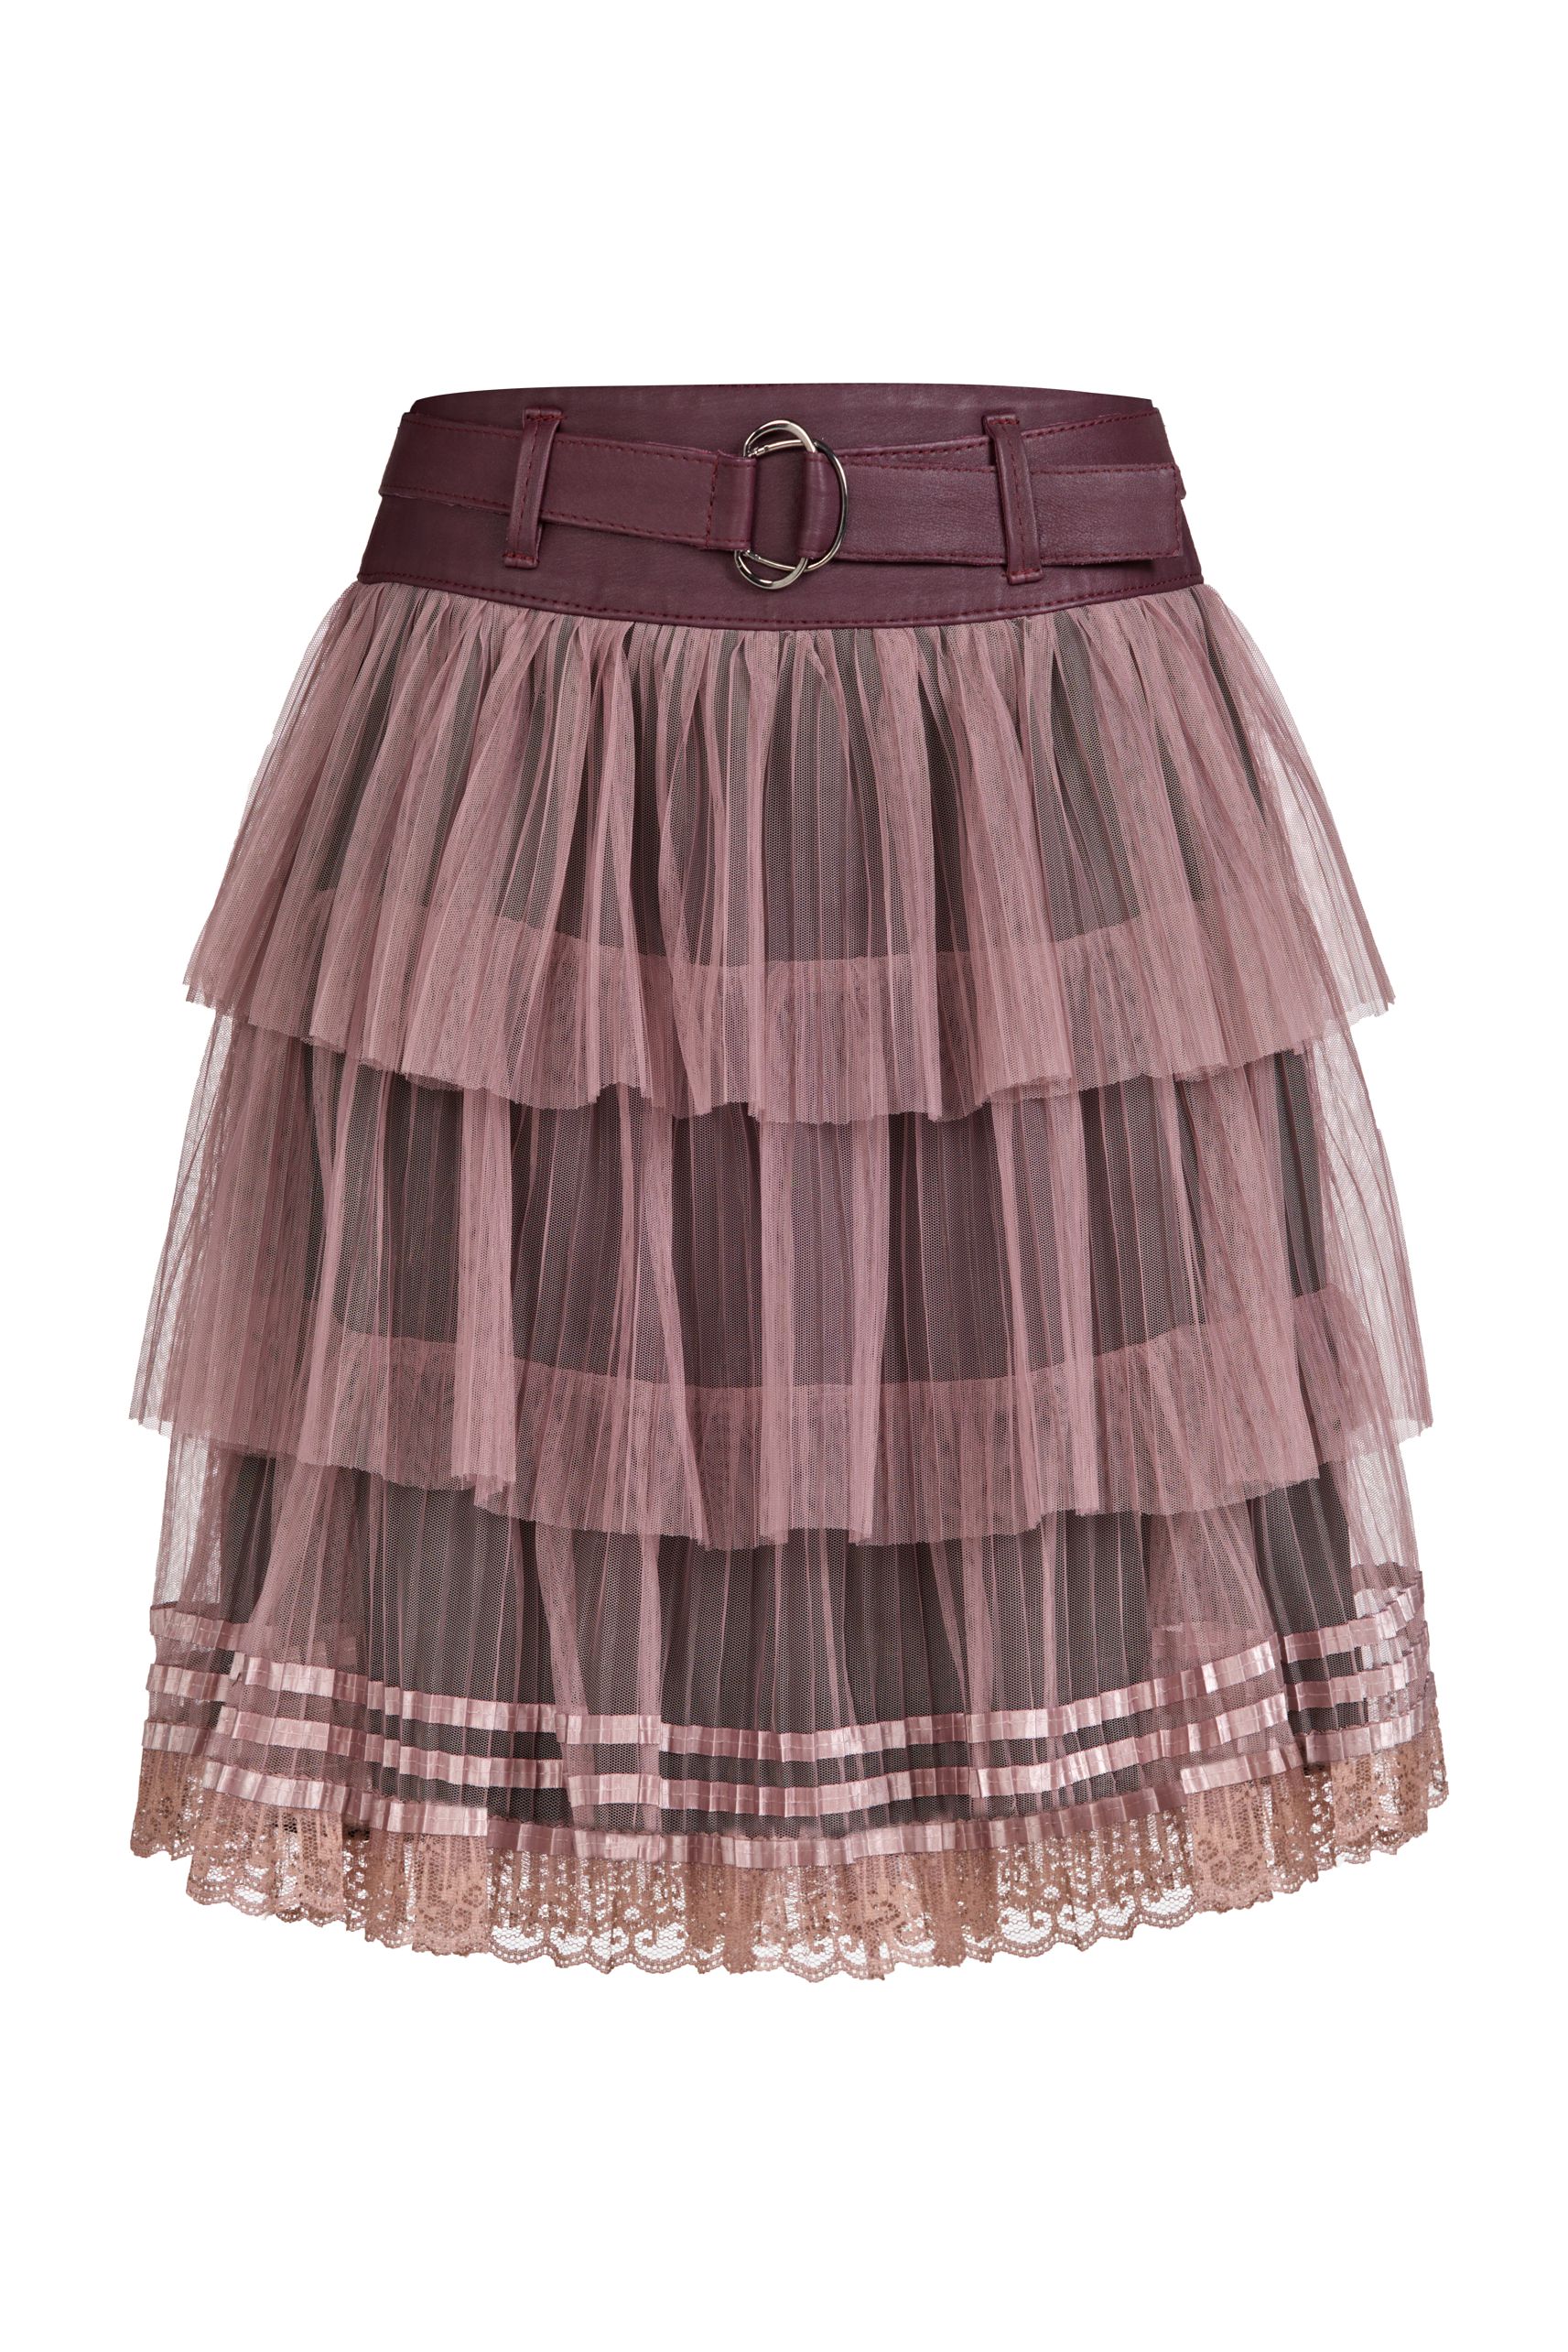 skirt made of tulle and leather, tulle skirt with leather yoke and belt, skirt with yoke and belt made of Italian leather, skirt with yoke made of natural leather and pleated tulle, skirt with yoke made of natural leather